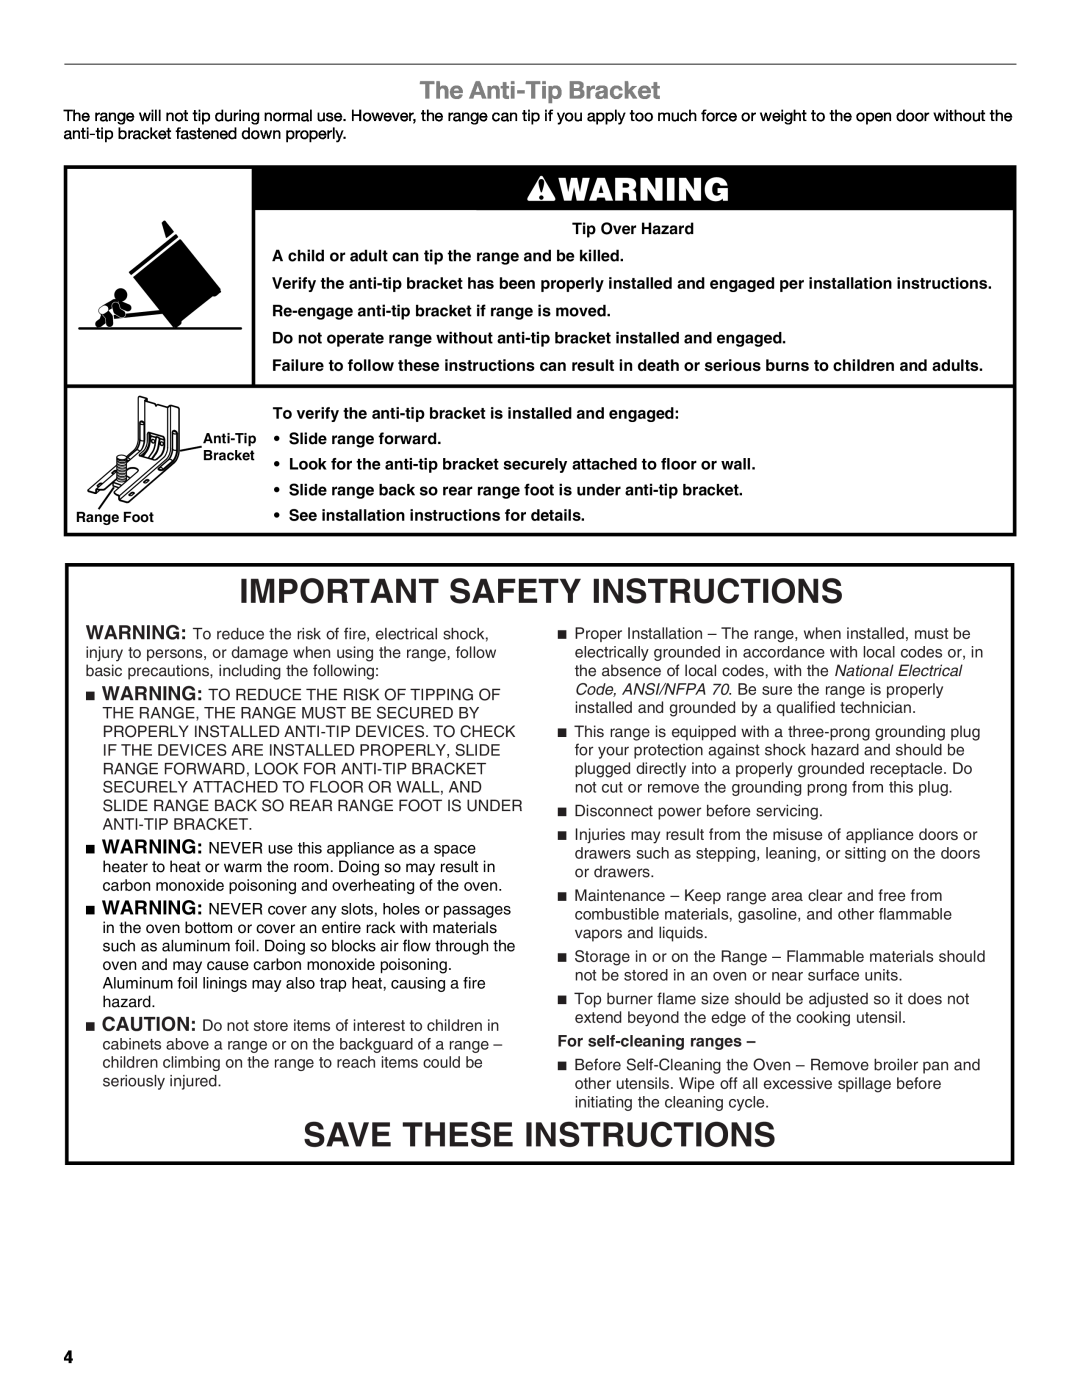 Whirlpool W10203462D manual The Anti-TipBracket, Important Safety Instructions, Save These Instructions 